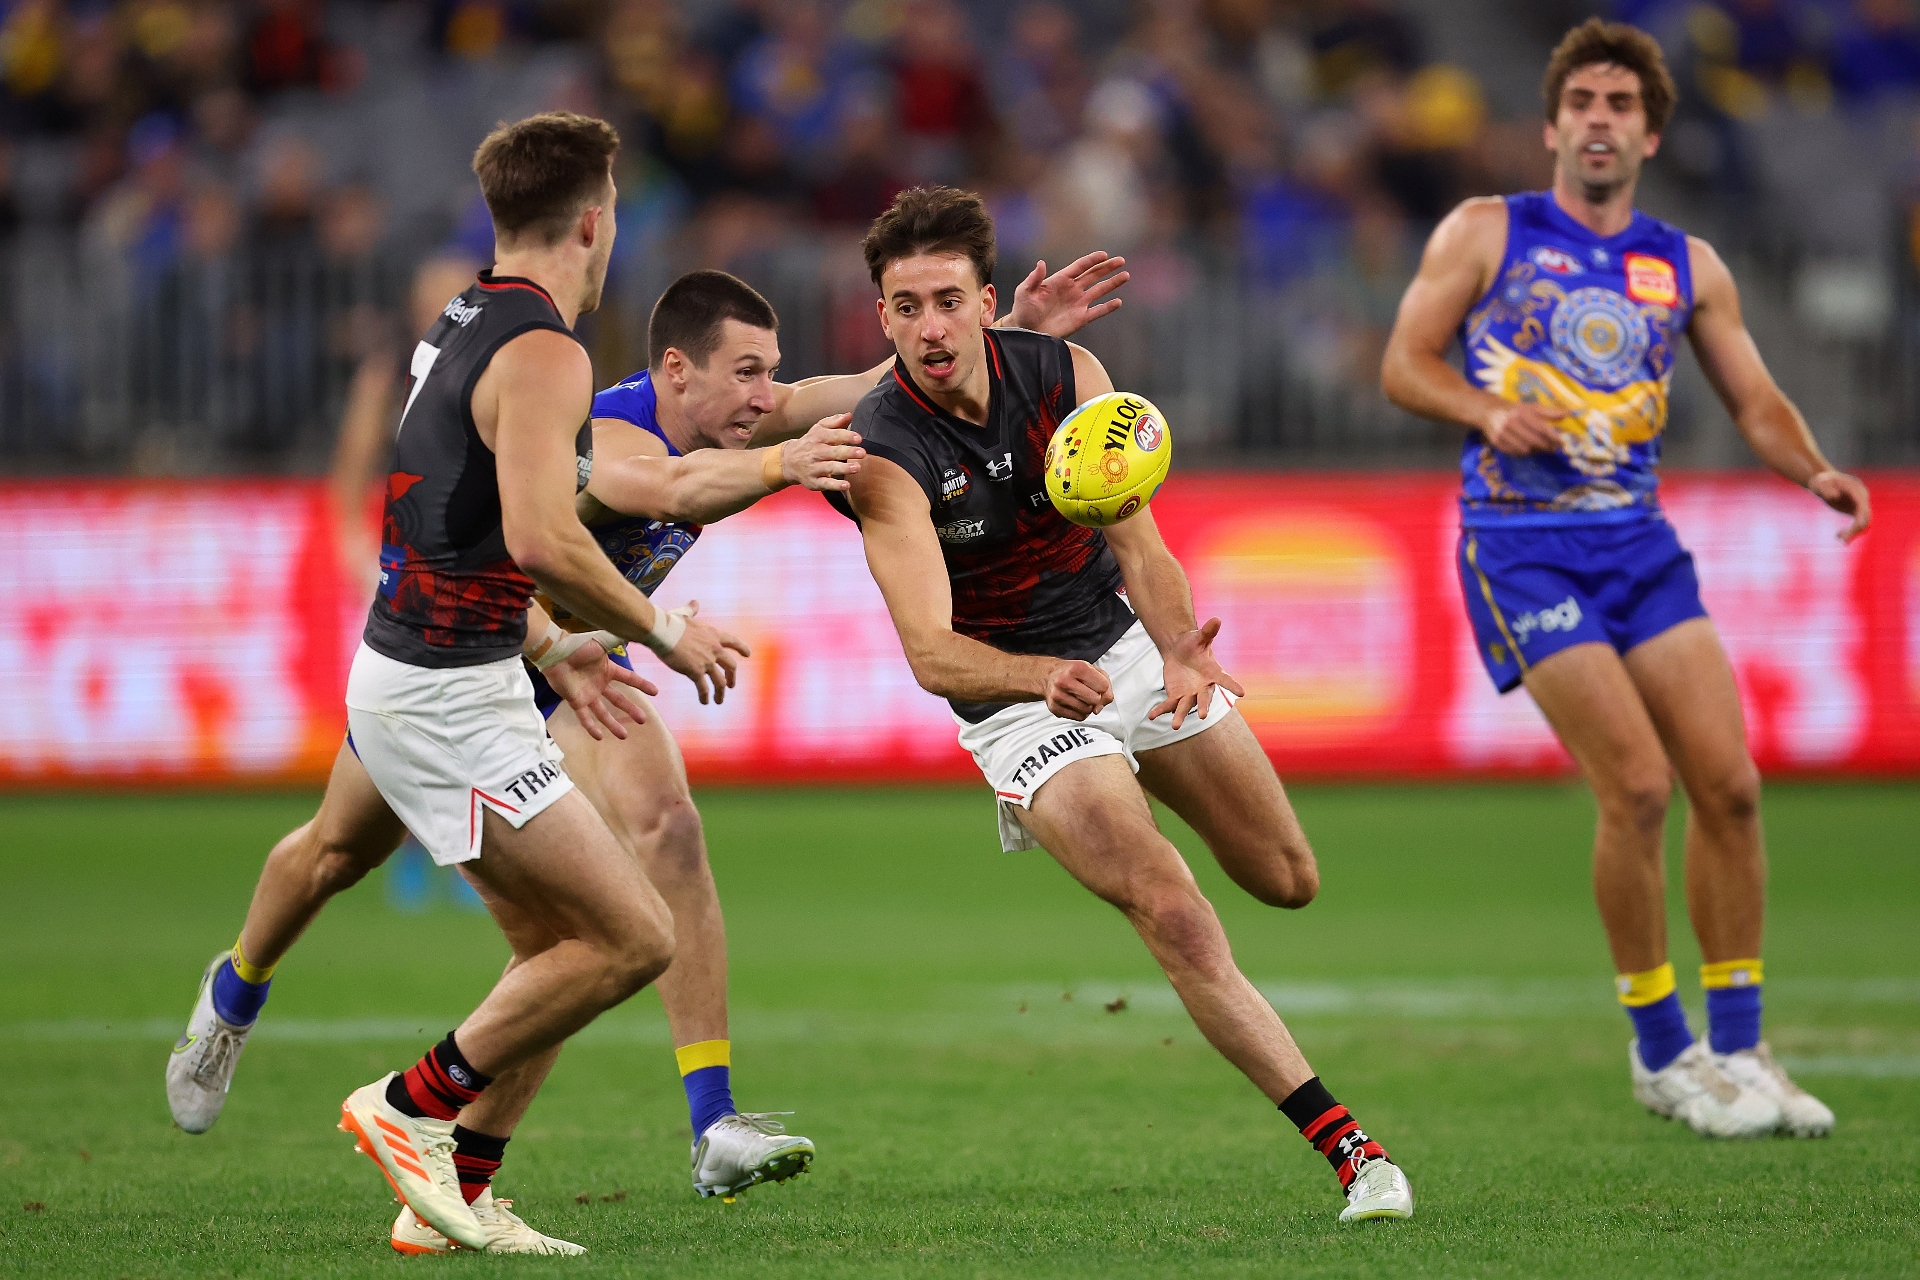 Essendon Bombers vs West Coast Eagles Tips & Preview - Bombers to ...